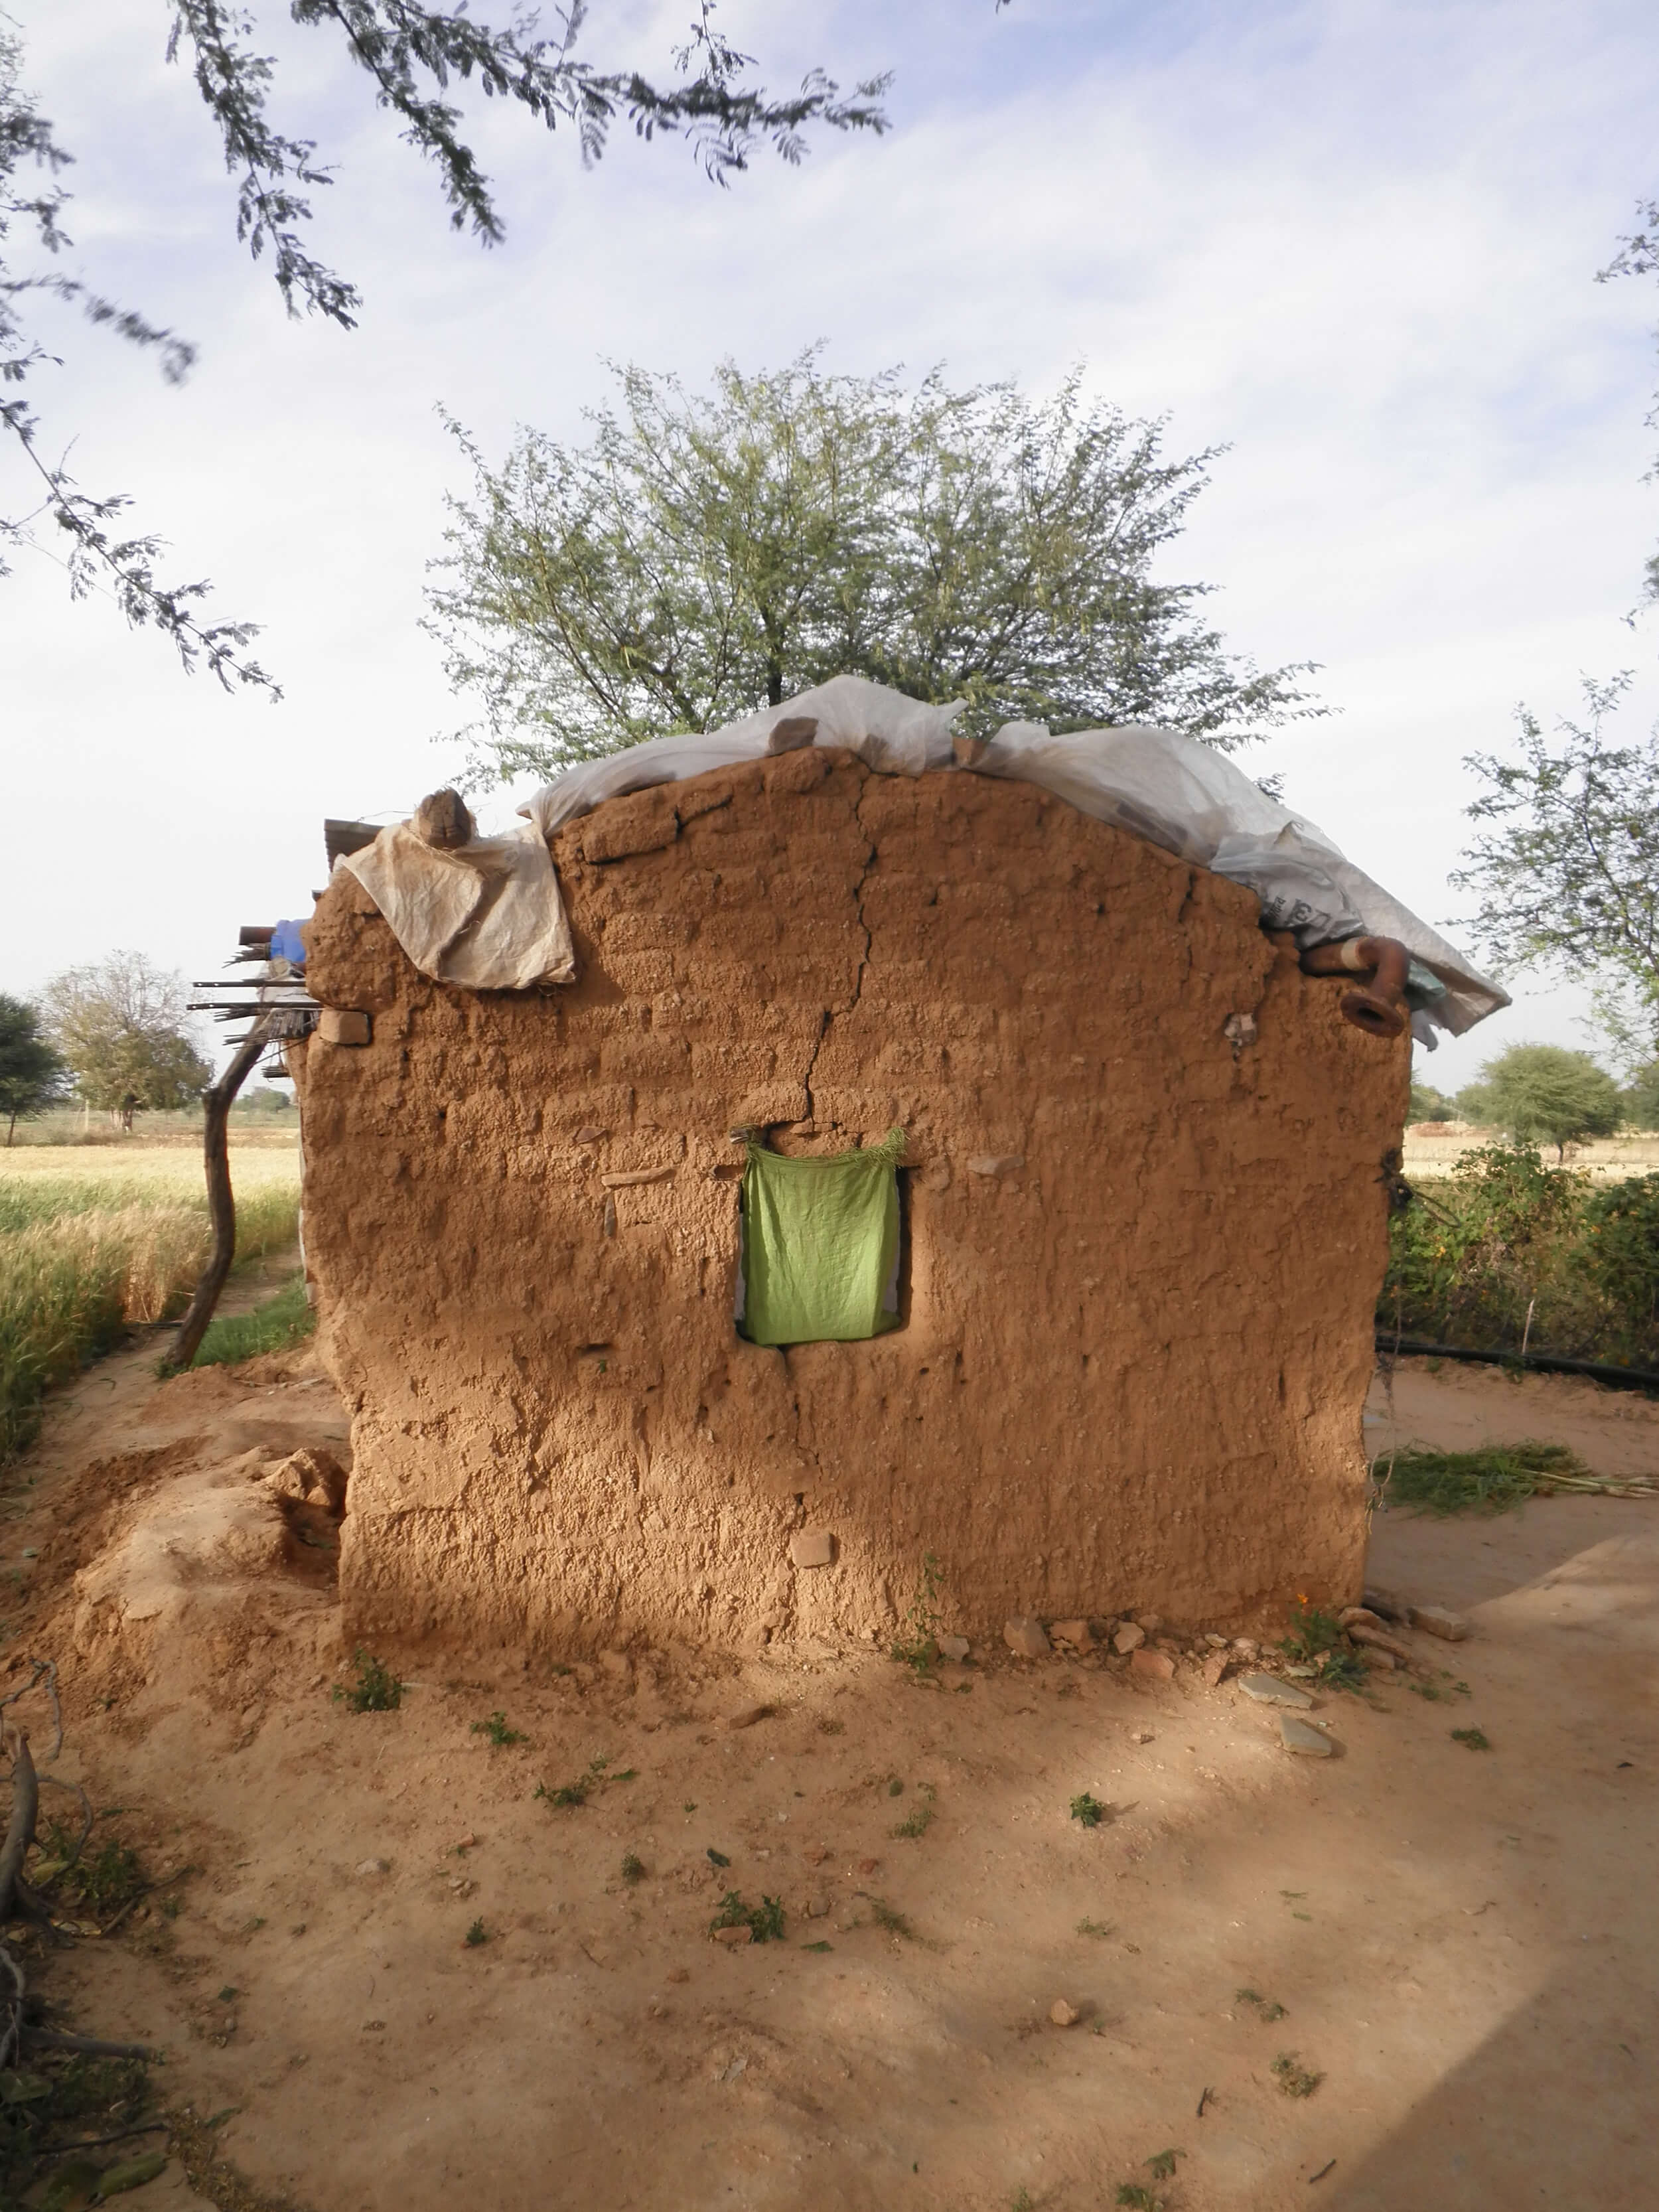 A hut made of dirt on the outskirts of India